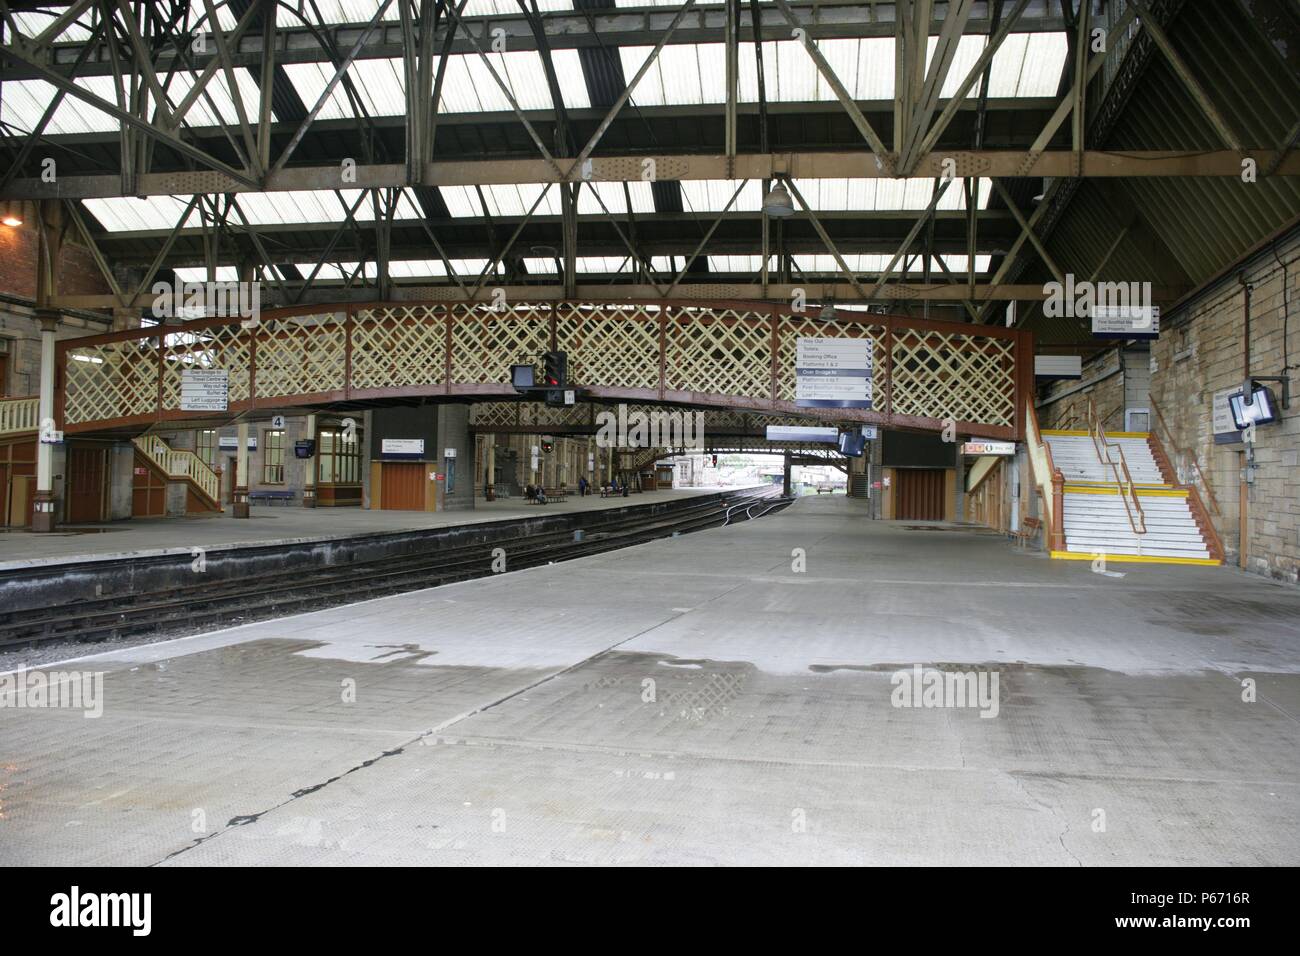 View from platform 3 towards platform 4 at Perth station, Perthshire showing the staircase access to the footbridge and the platform canopy. 2007 Stock Photo